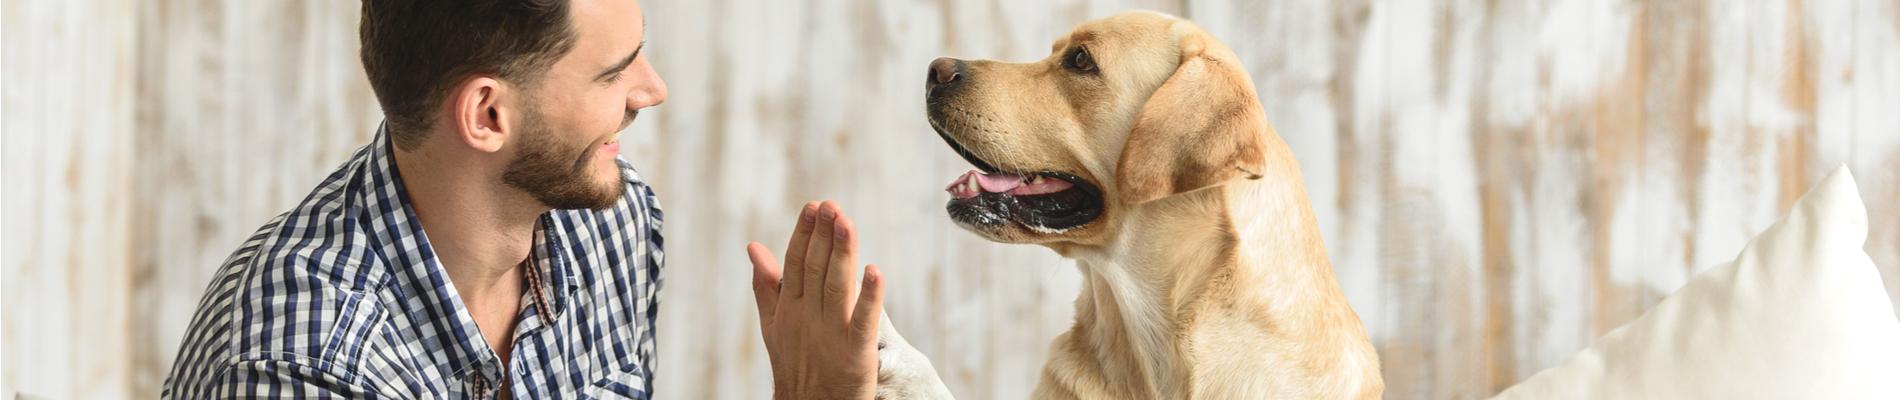 Man giving his dog a high five